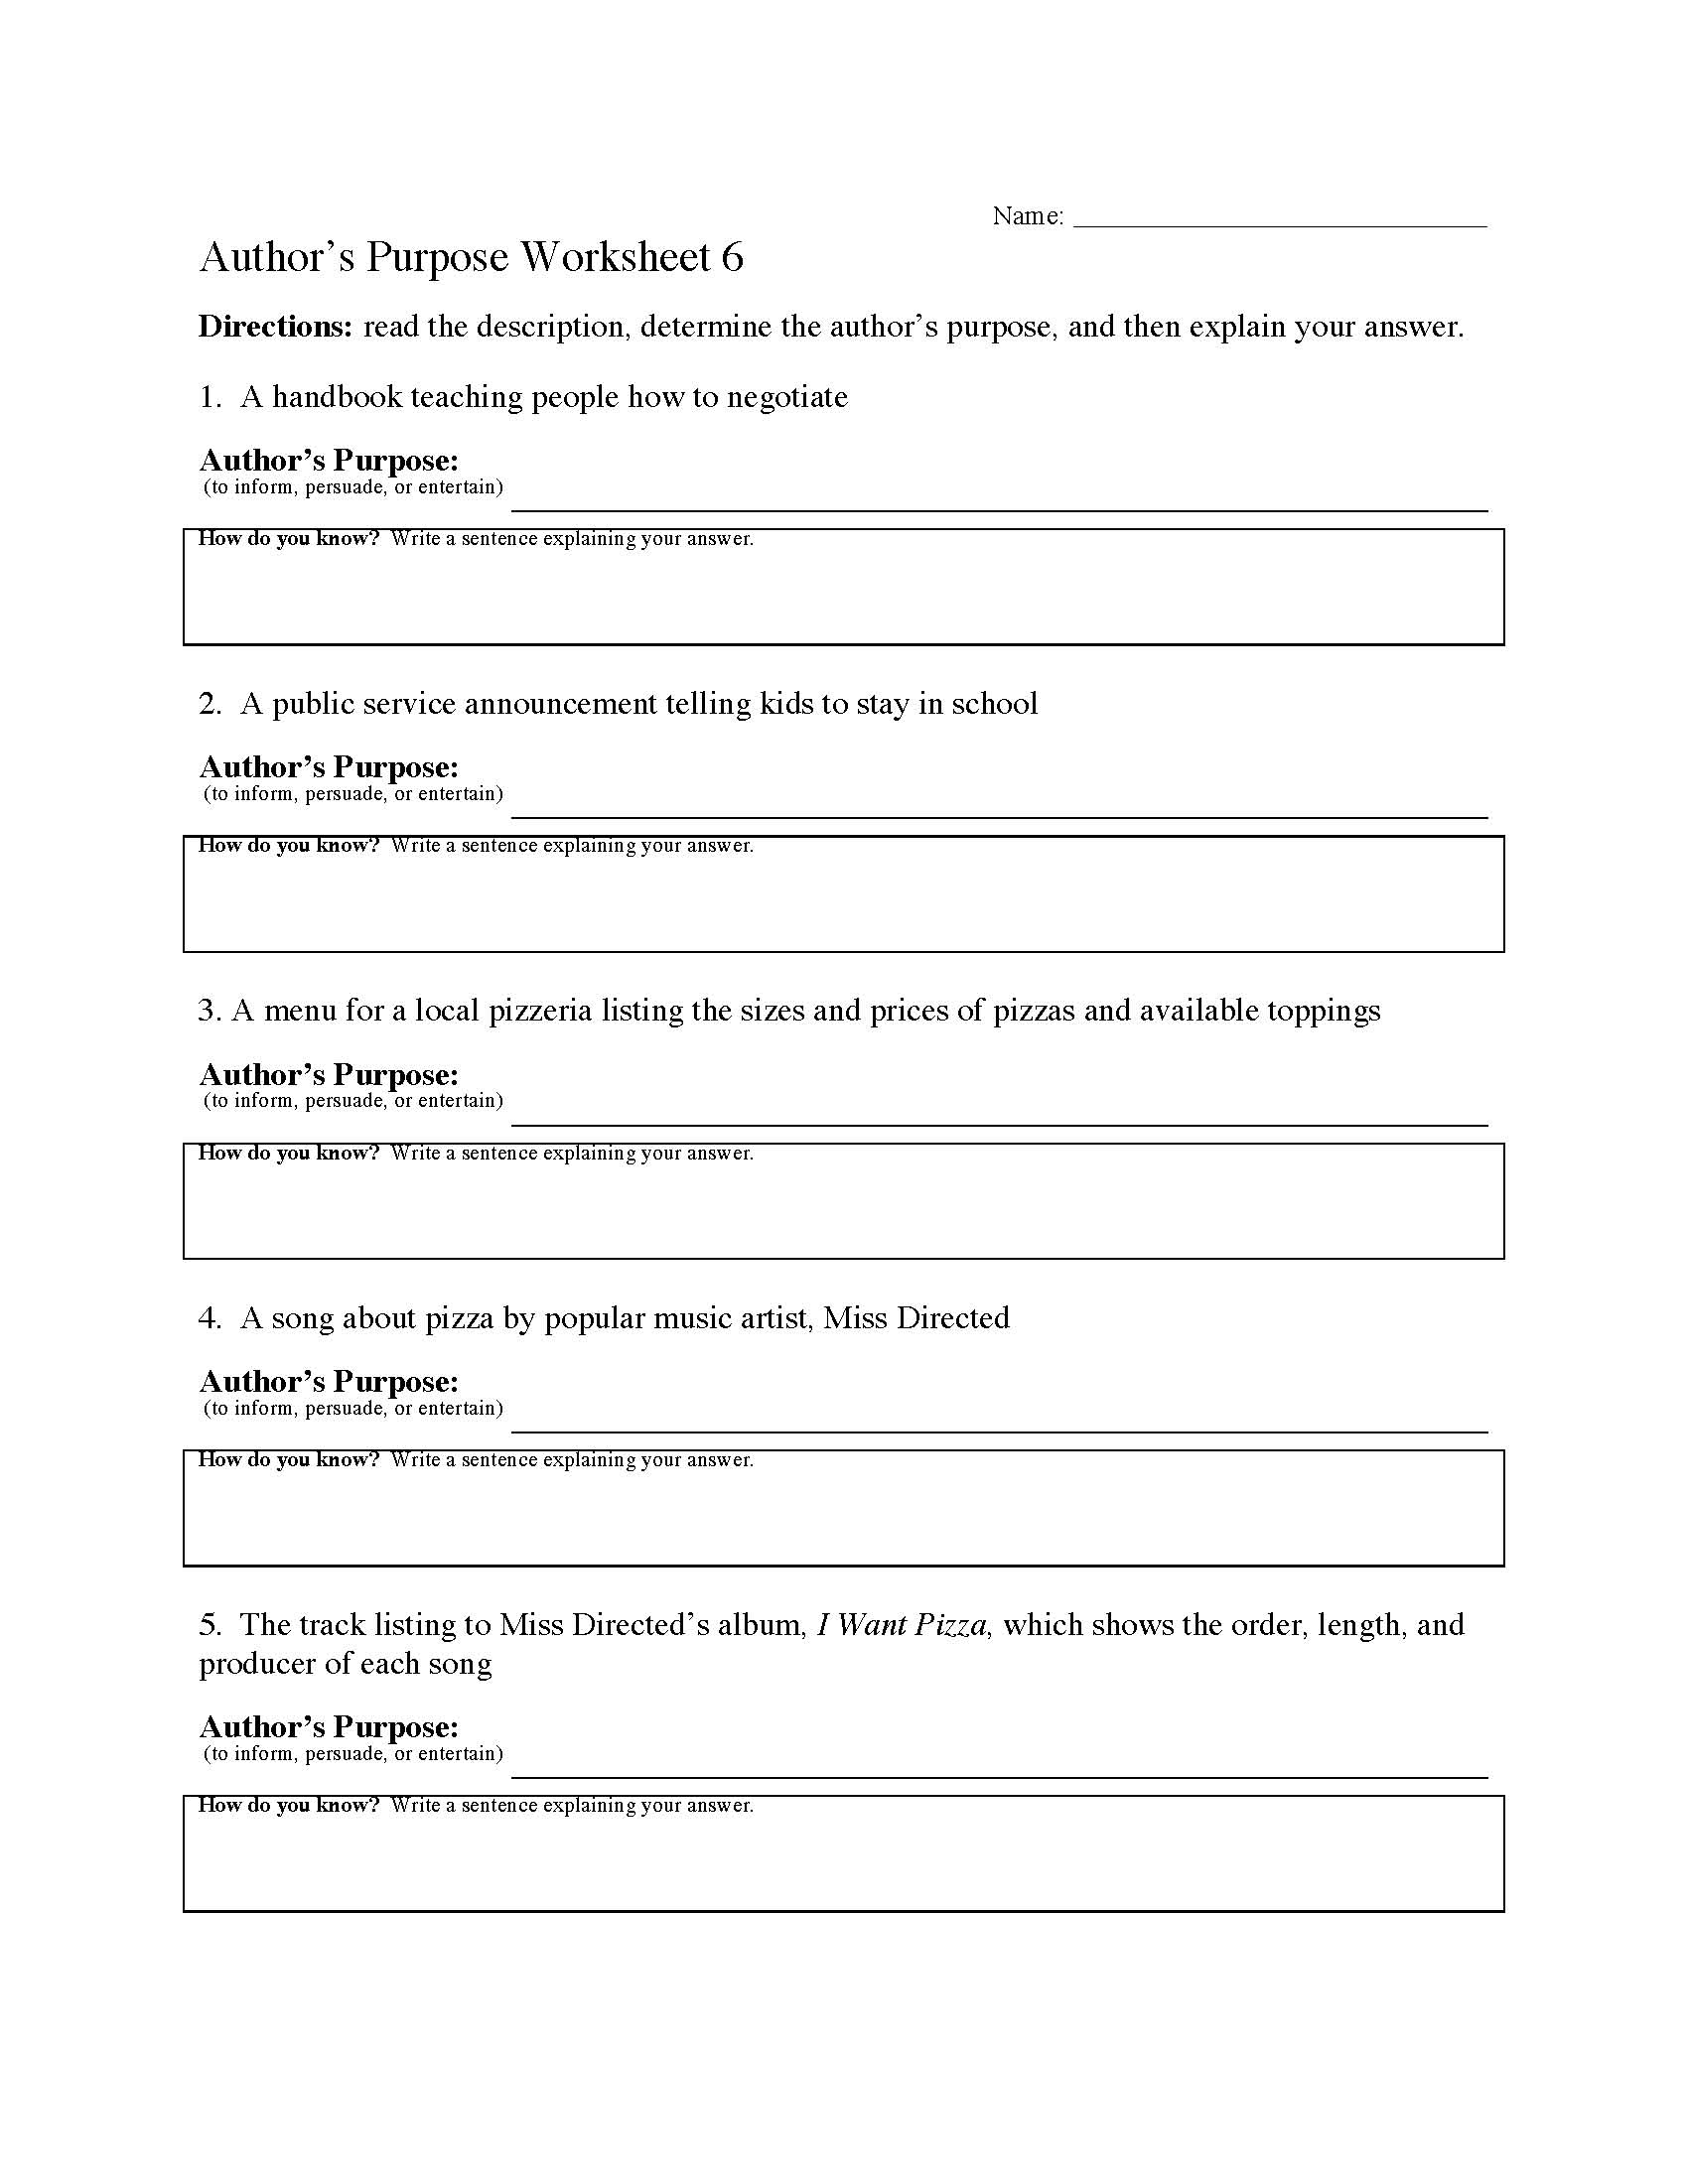 Author s Purpose Worksheet 6 Preview